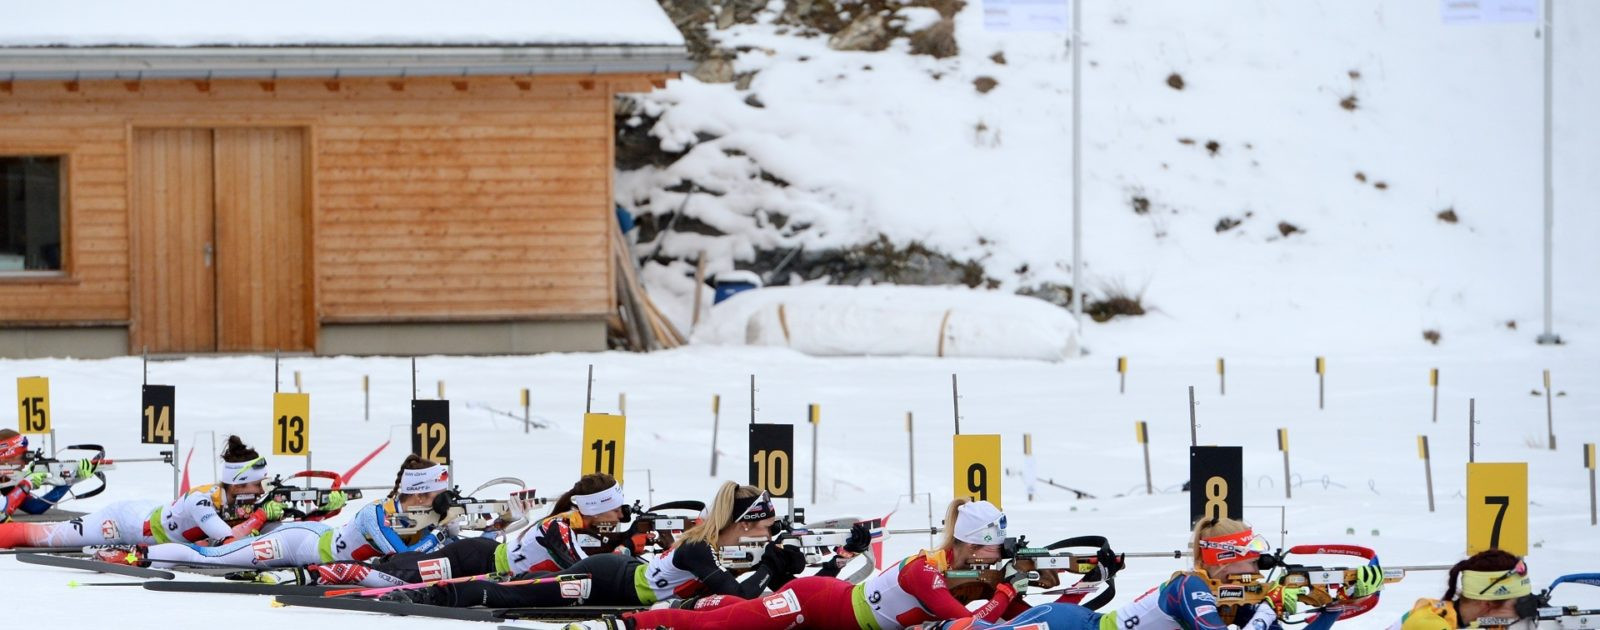 The Organising Committee for the 2021 Winter Universiade in Lucerne has taken the decision to re-locate the venues for biathlon and cross-country competitions ©Lucerne 2021